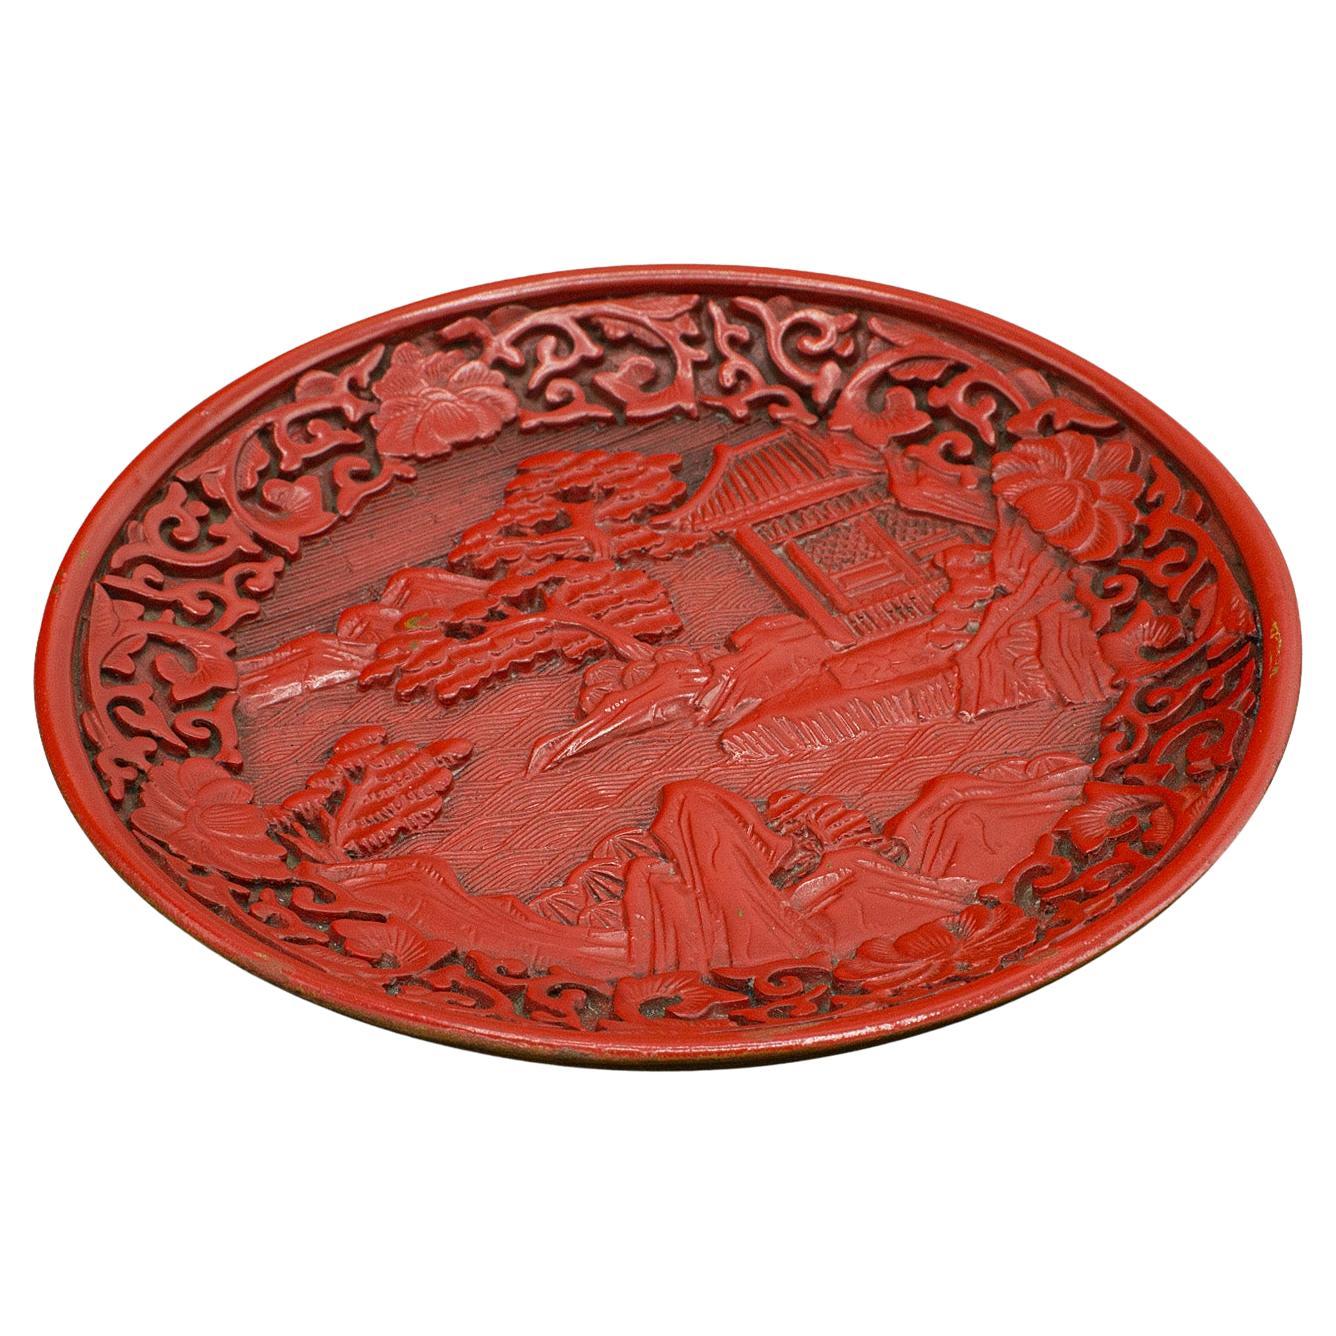 Small Antique Decorative Cinnabar Dish, Chinese, Display Plate, Qing, Victorian For Sale